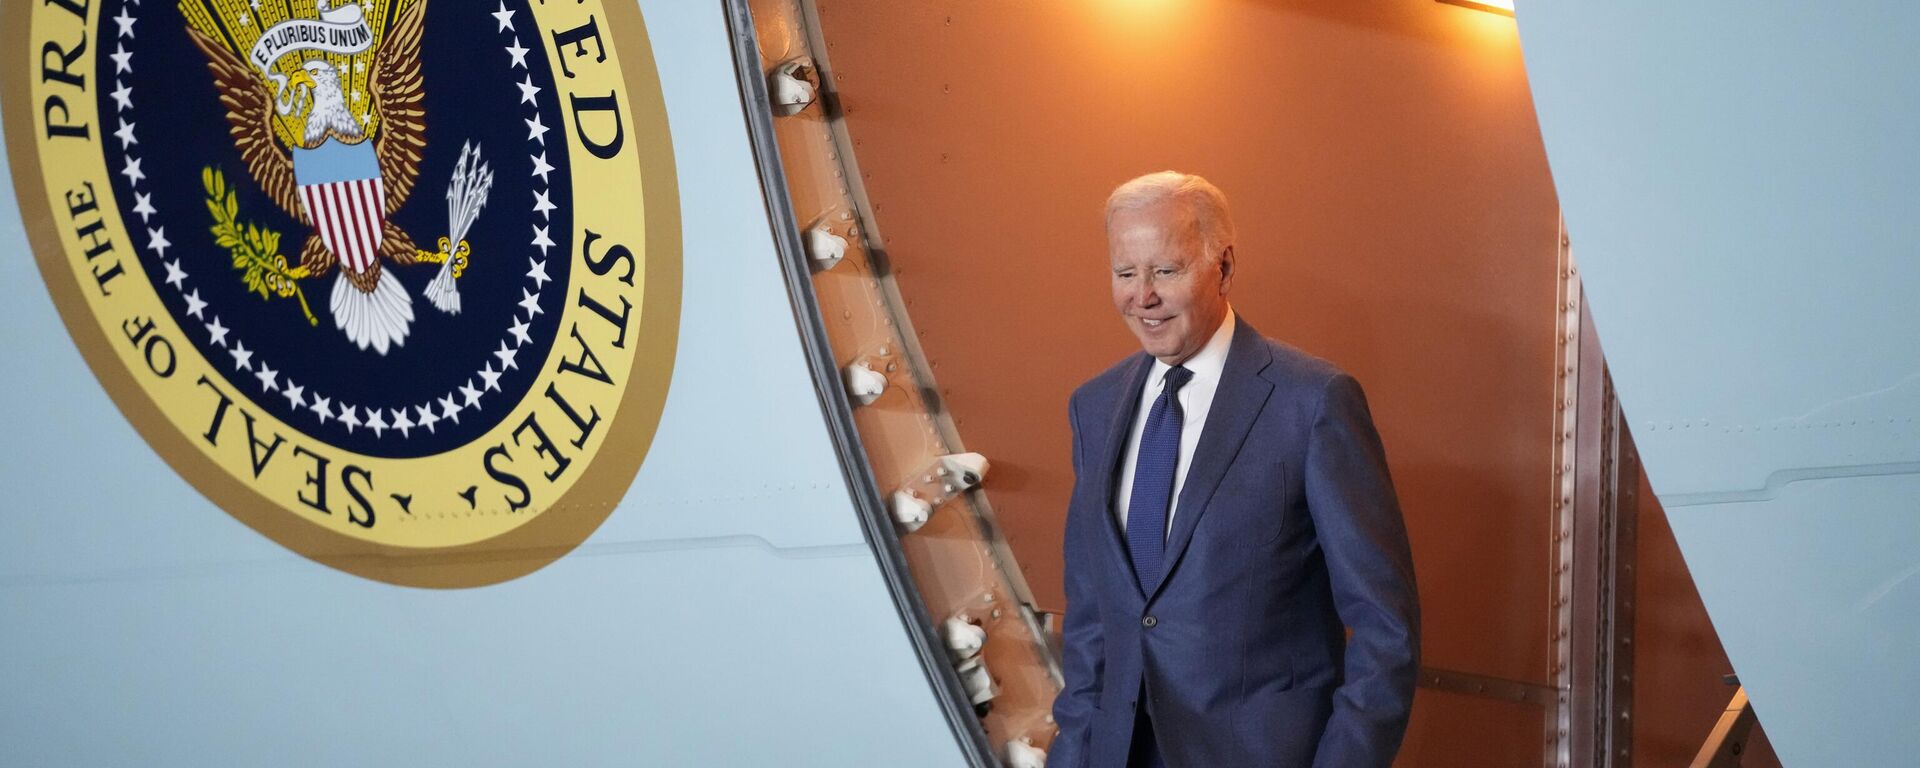 President Joe Biden steps off Air Force One at Belfast International Airport in Belfast, Northern Ireland, Tuesday, April 11, 2023. Biden is visiting the United Kingdom and Ireland in part to help celebrate the 25th anniversary of the Good Friday Agreement. - Sputnik International, 1920, 27.04.2023